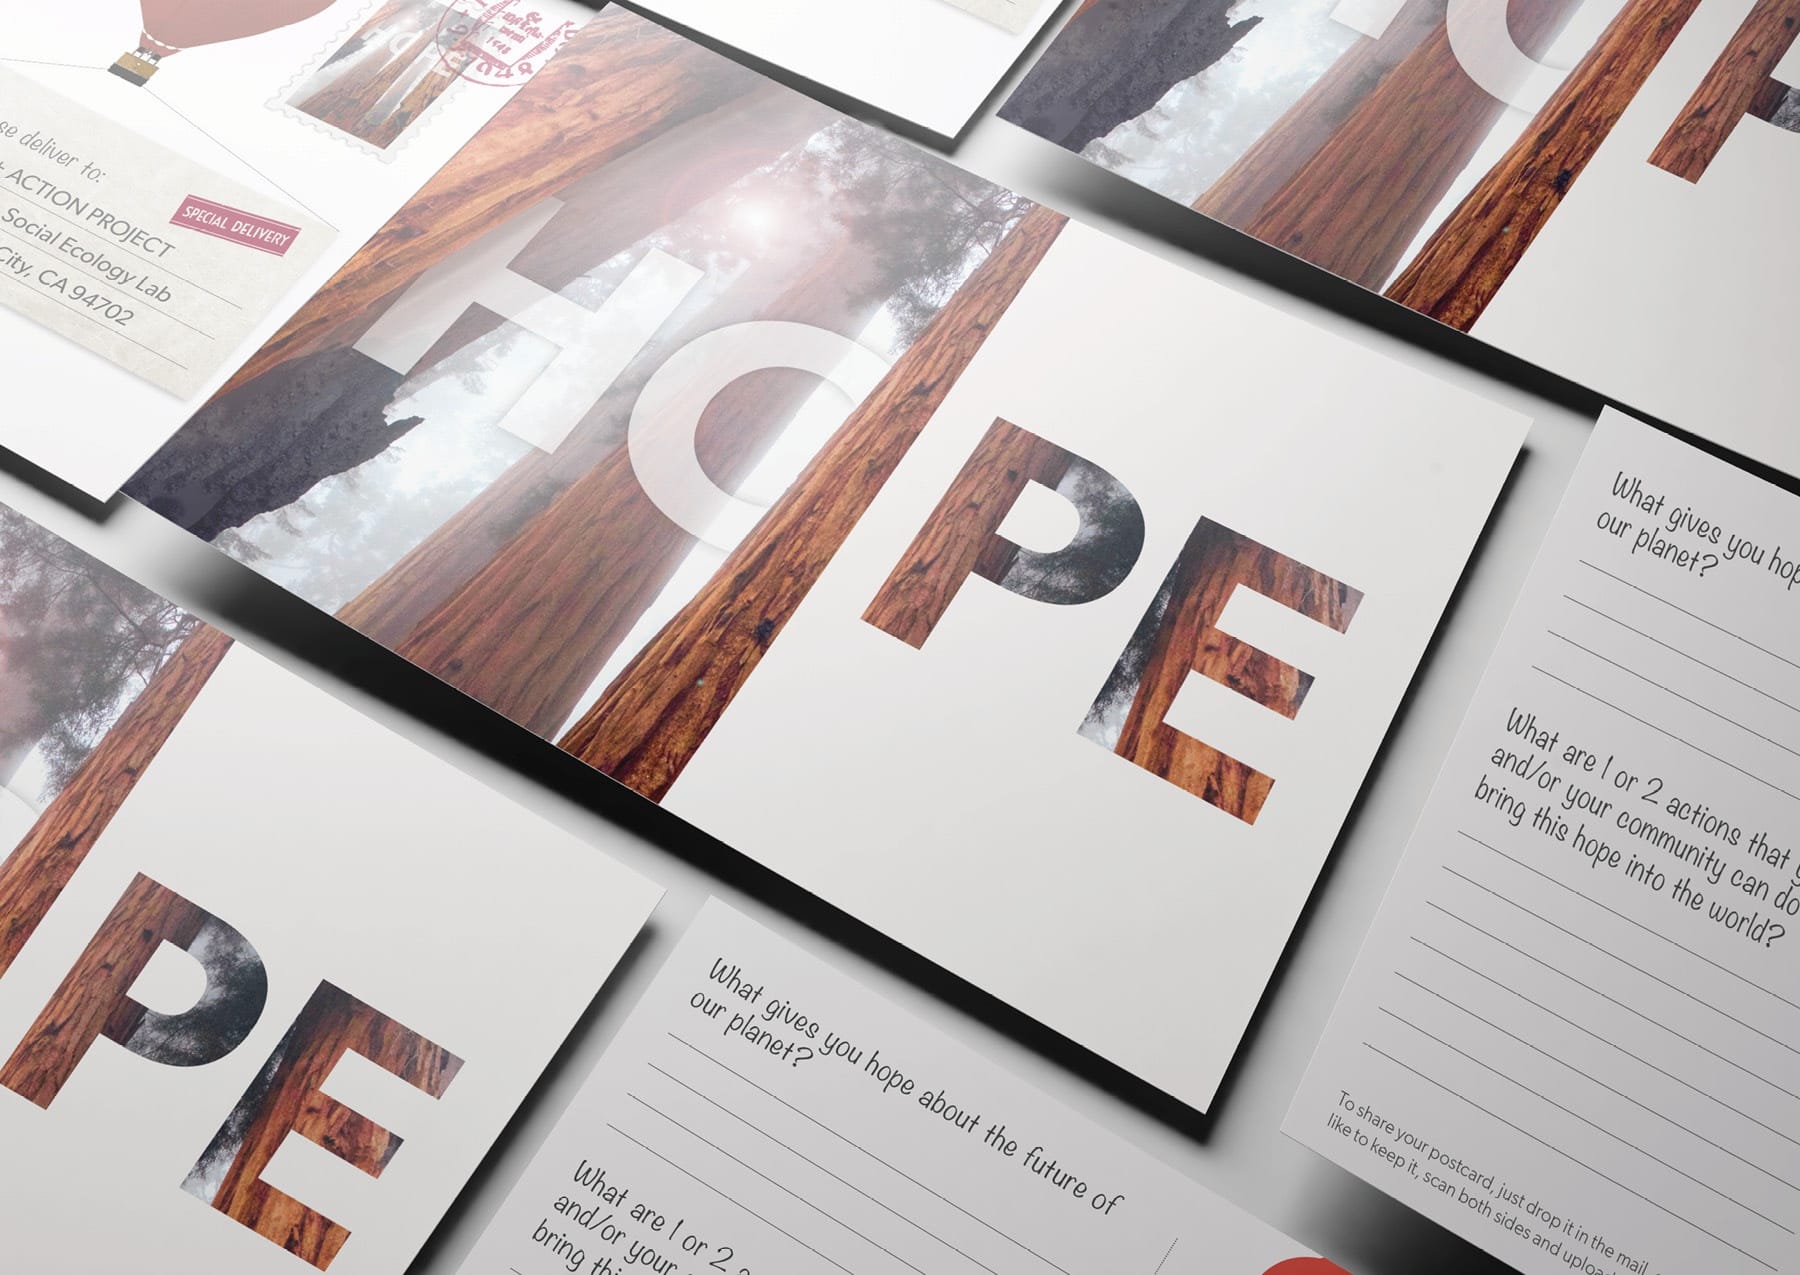 Collage of postcards with an image of a redwood tree trunk and the word "Hope"